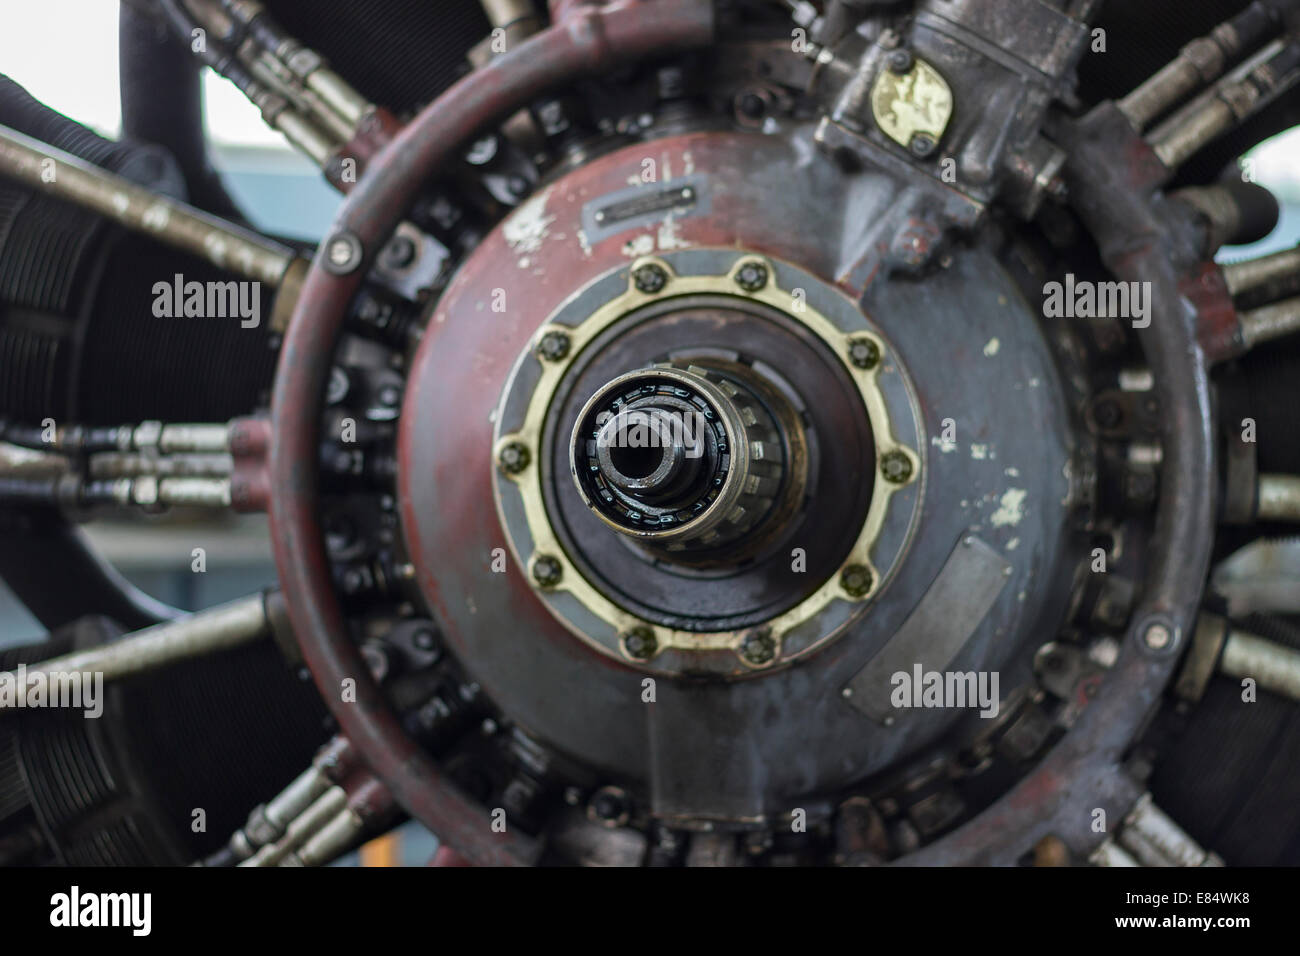 Closeup photo of a jet engine of a vintage airplane. Stock Photo